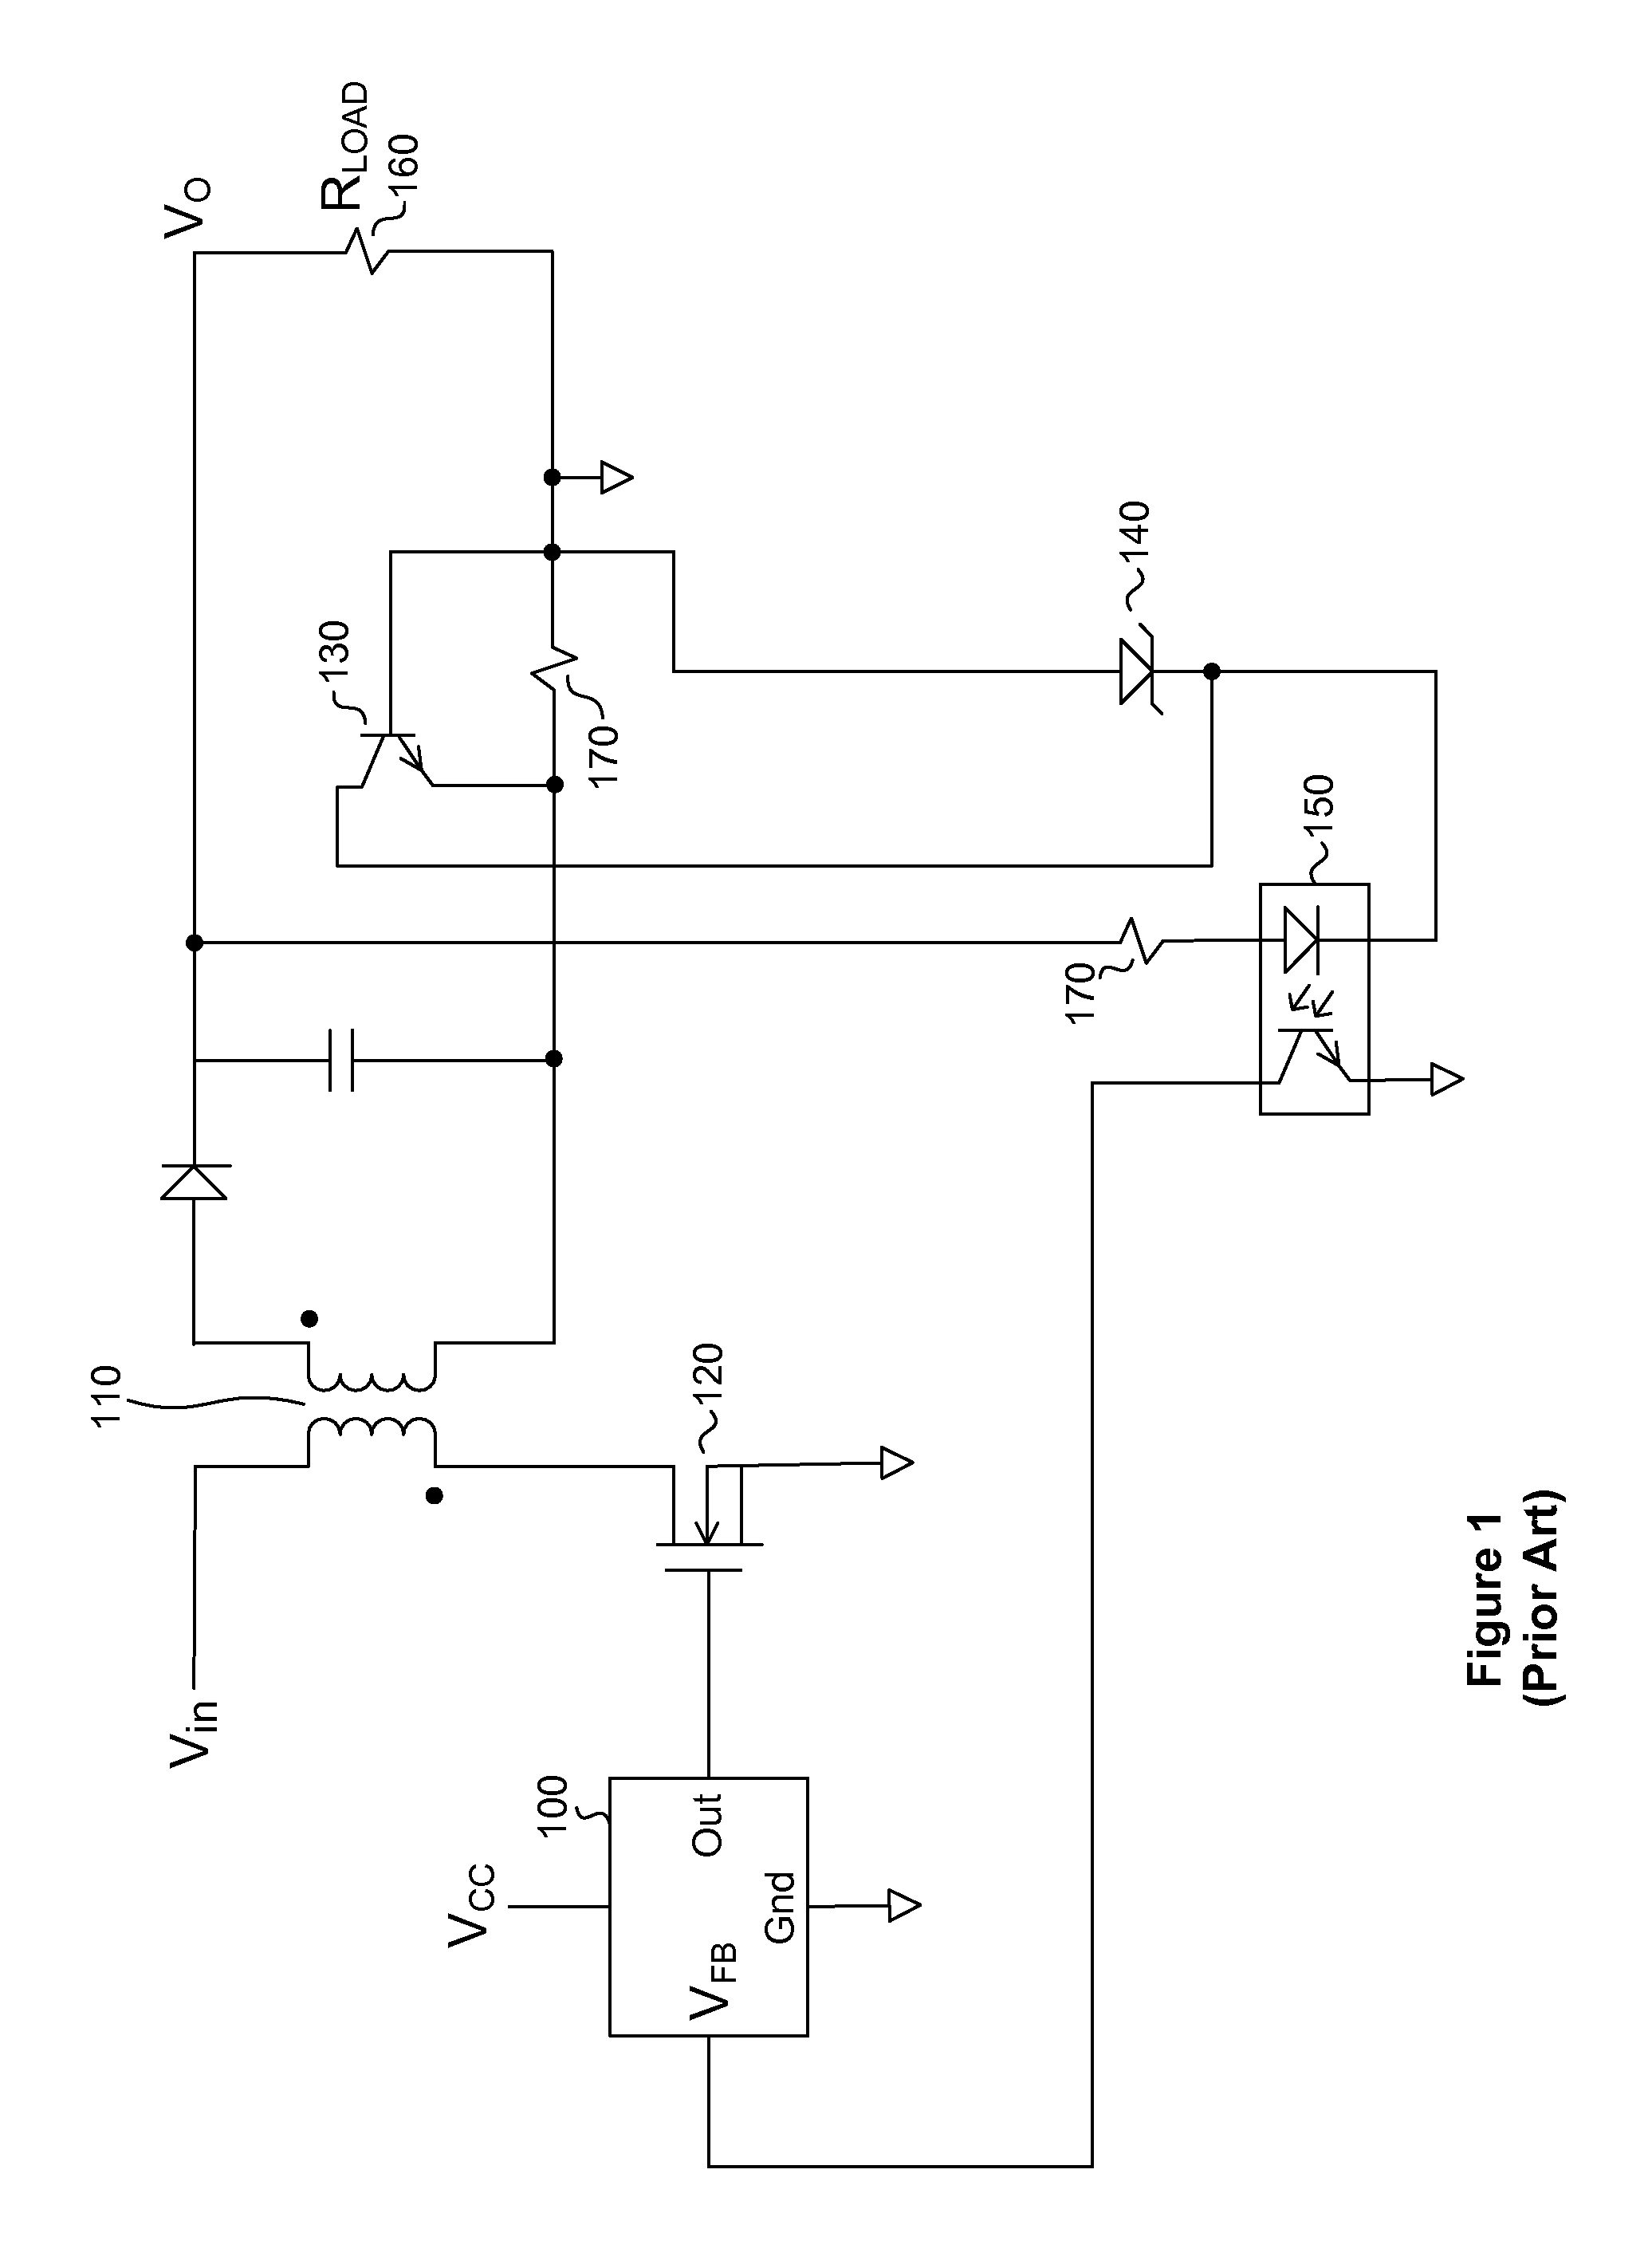 On-time control for constant current mode in a flyback power supply